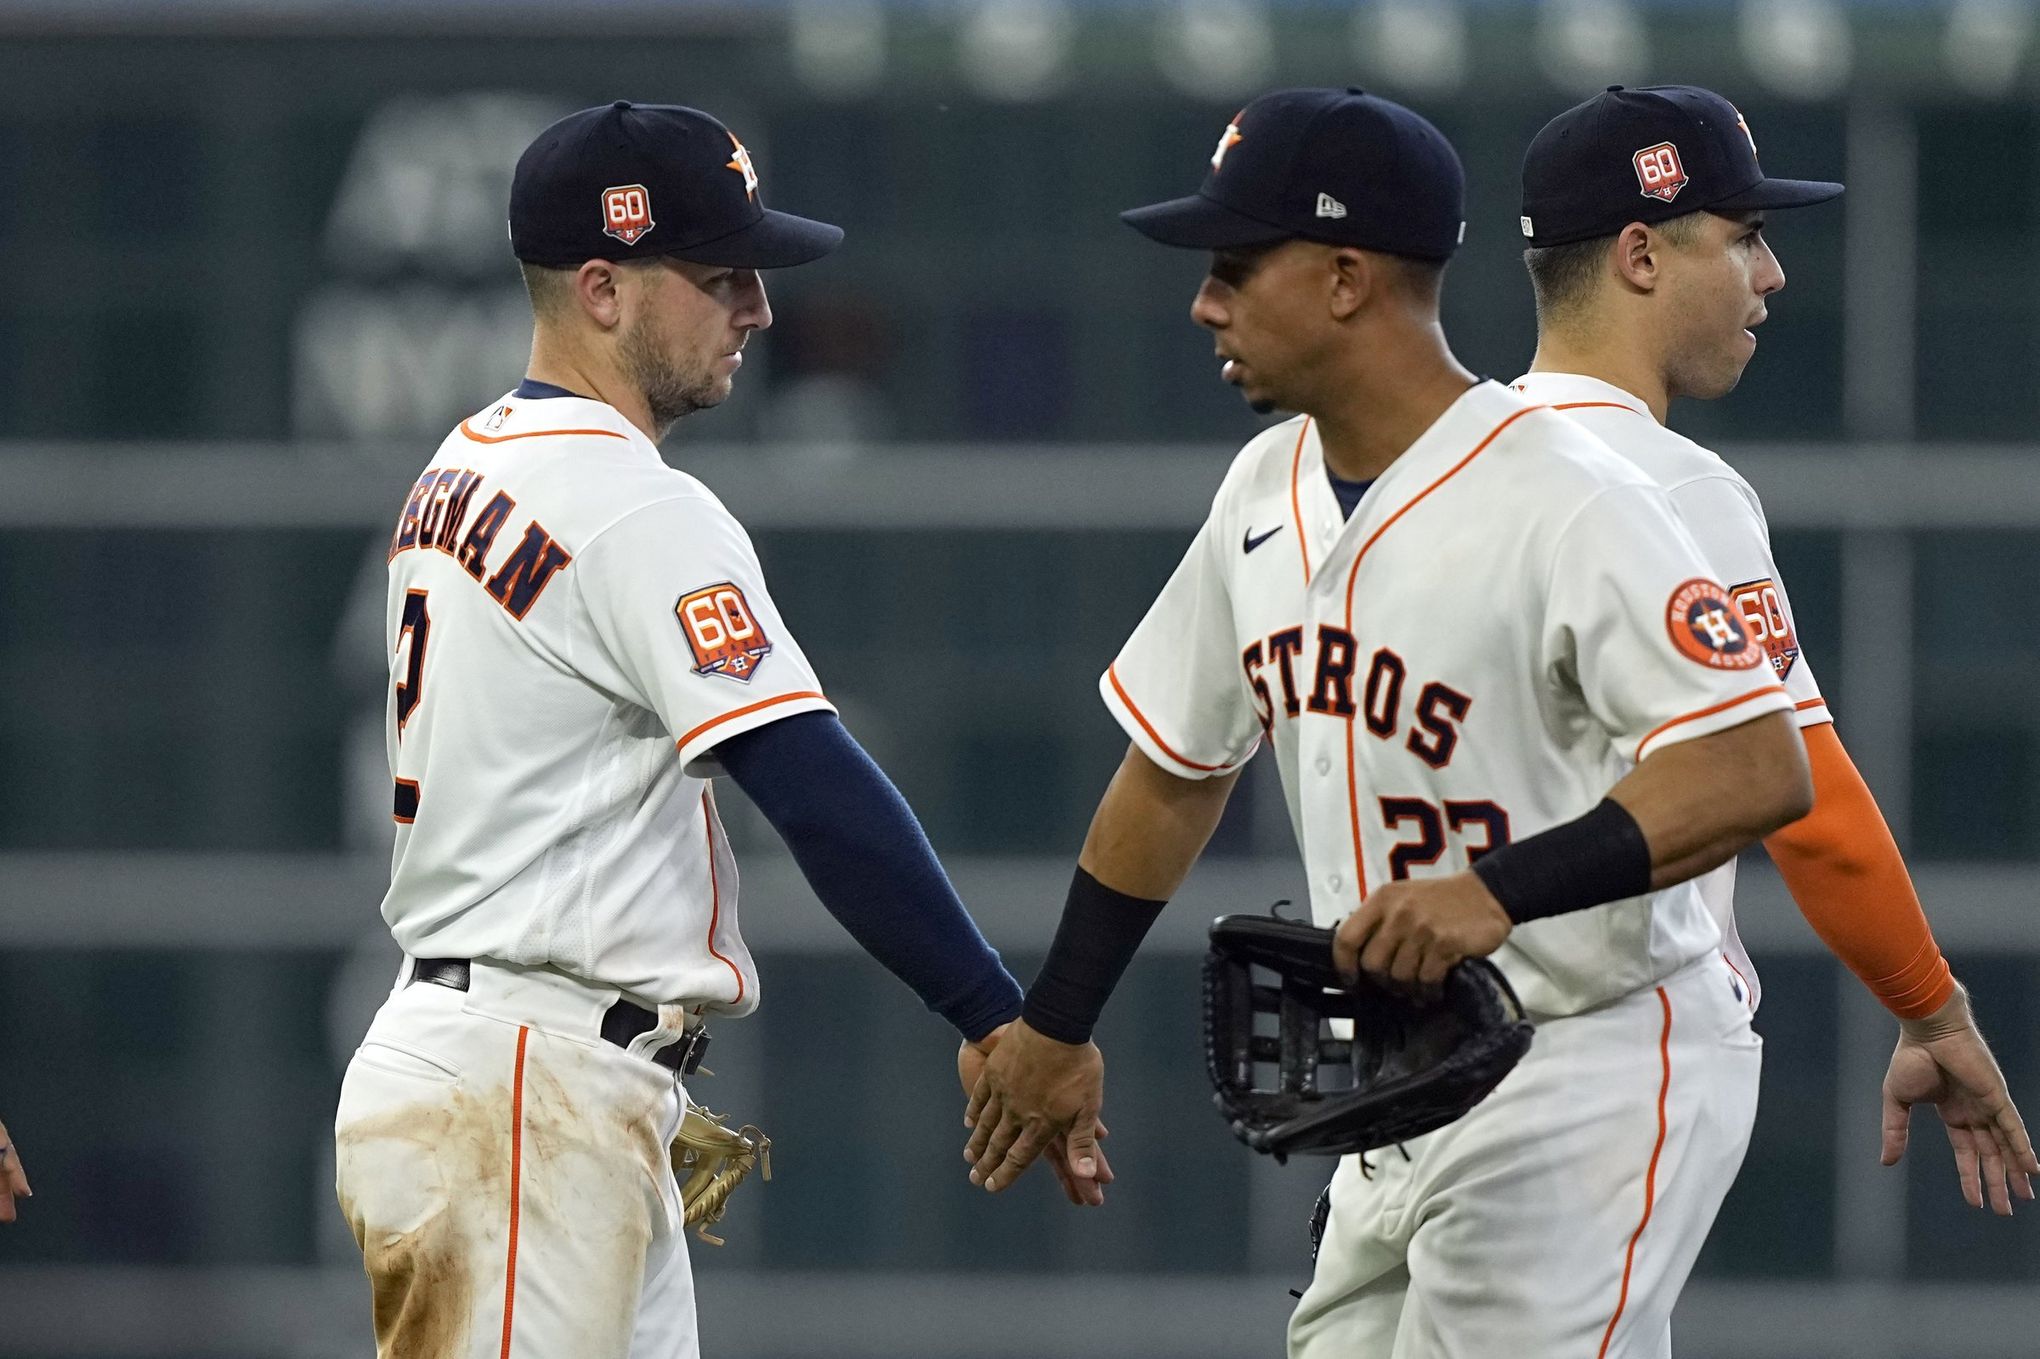 Mariners get swept by Astros, score just two runs in three-game series